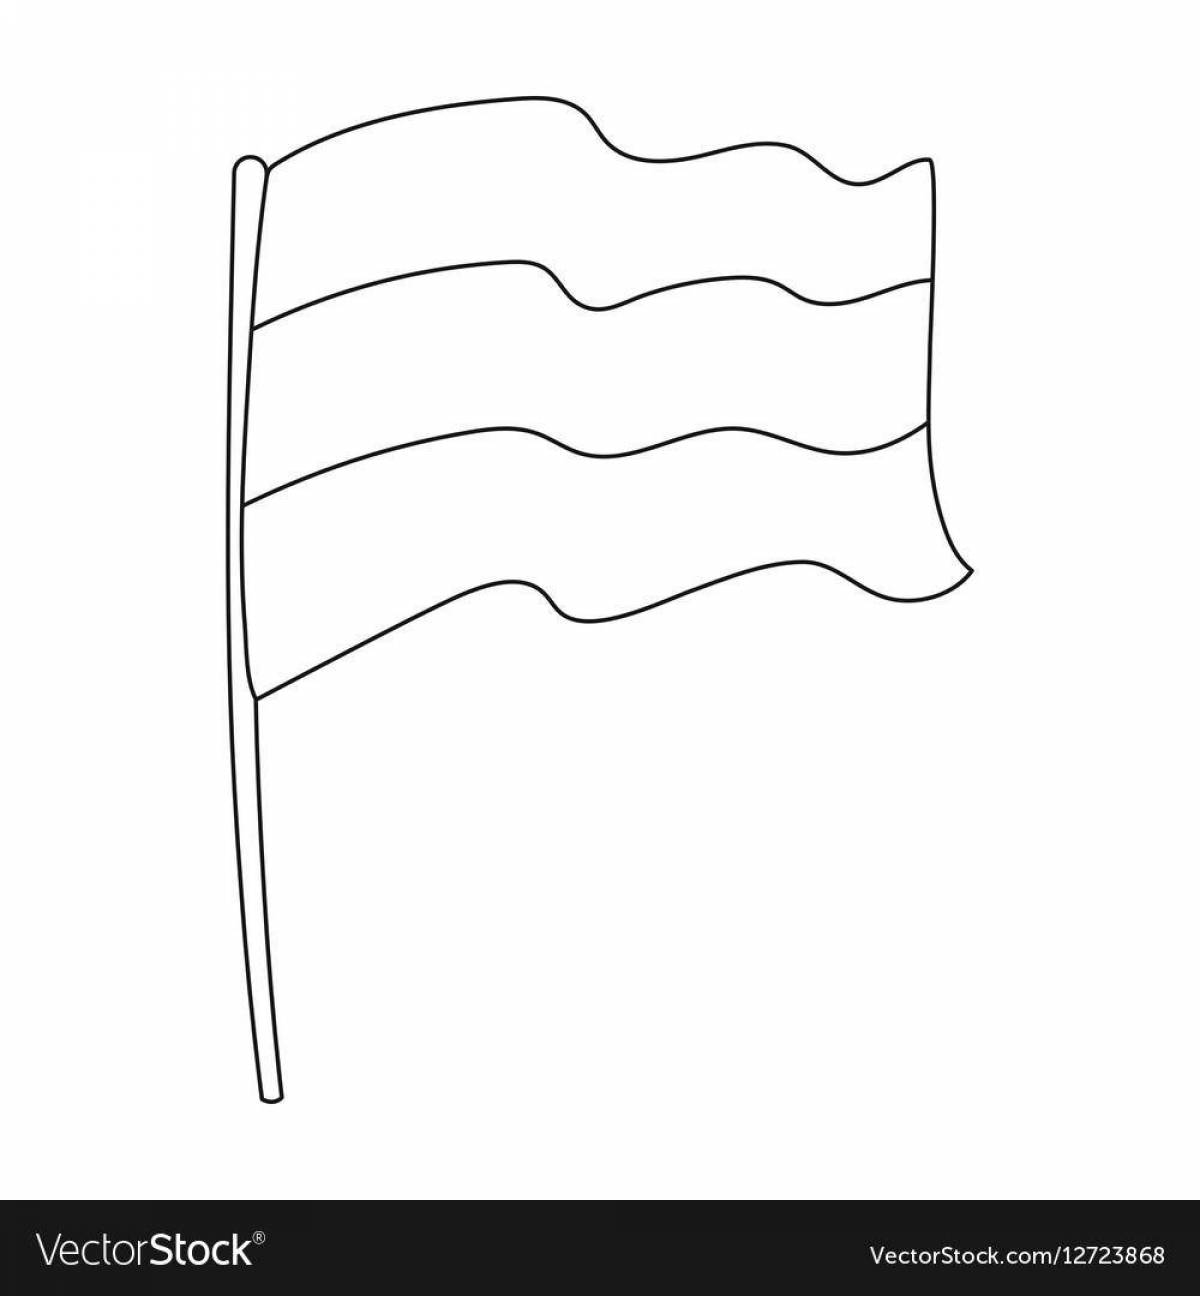 Vibrant Russian flag coloring page for kids